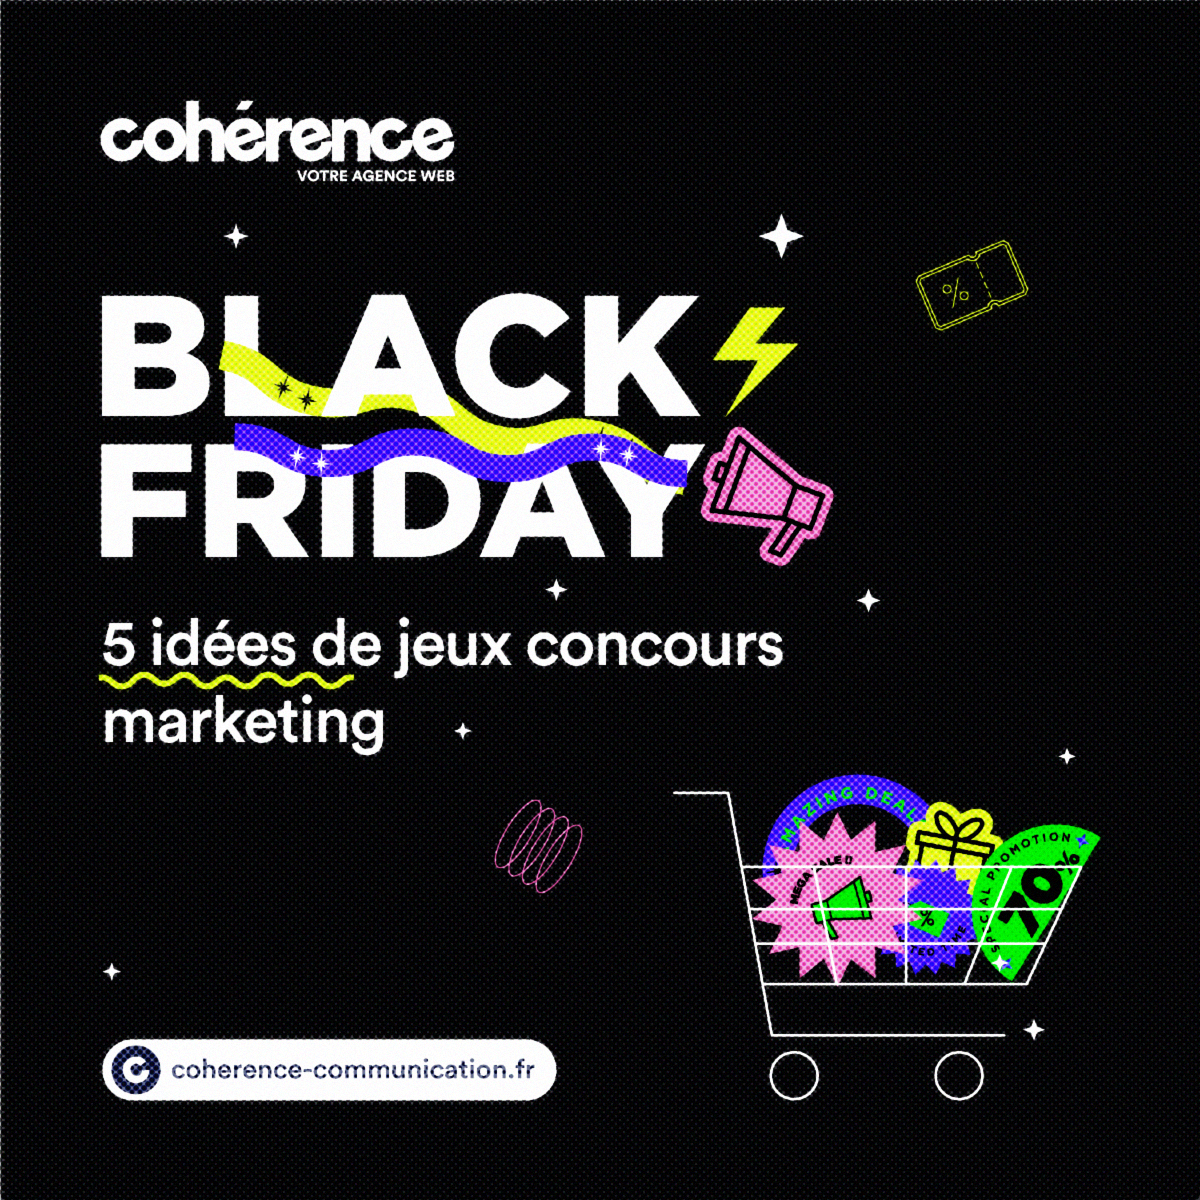 Coherence Agence Web Jeux Concours Black Friday 1